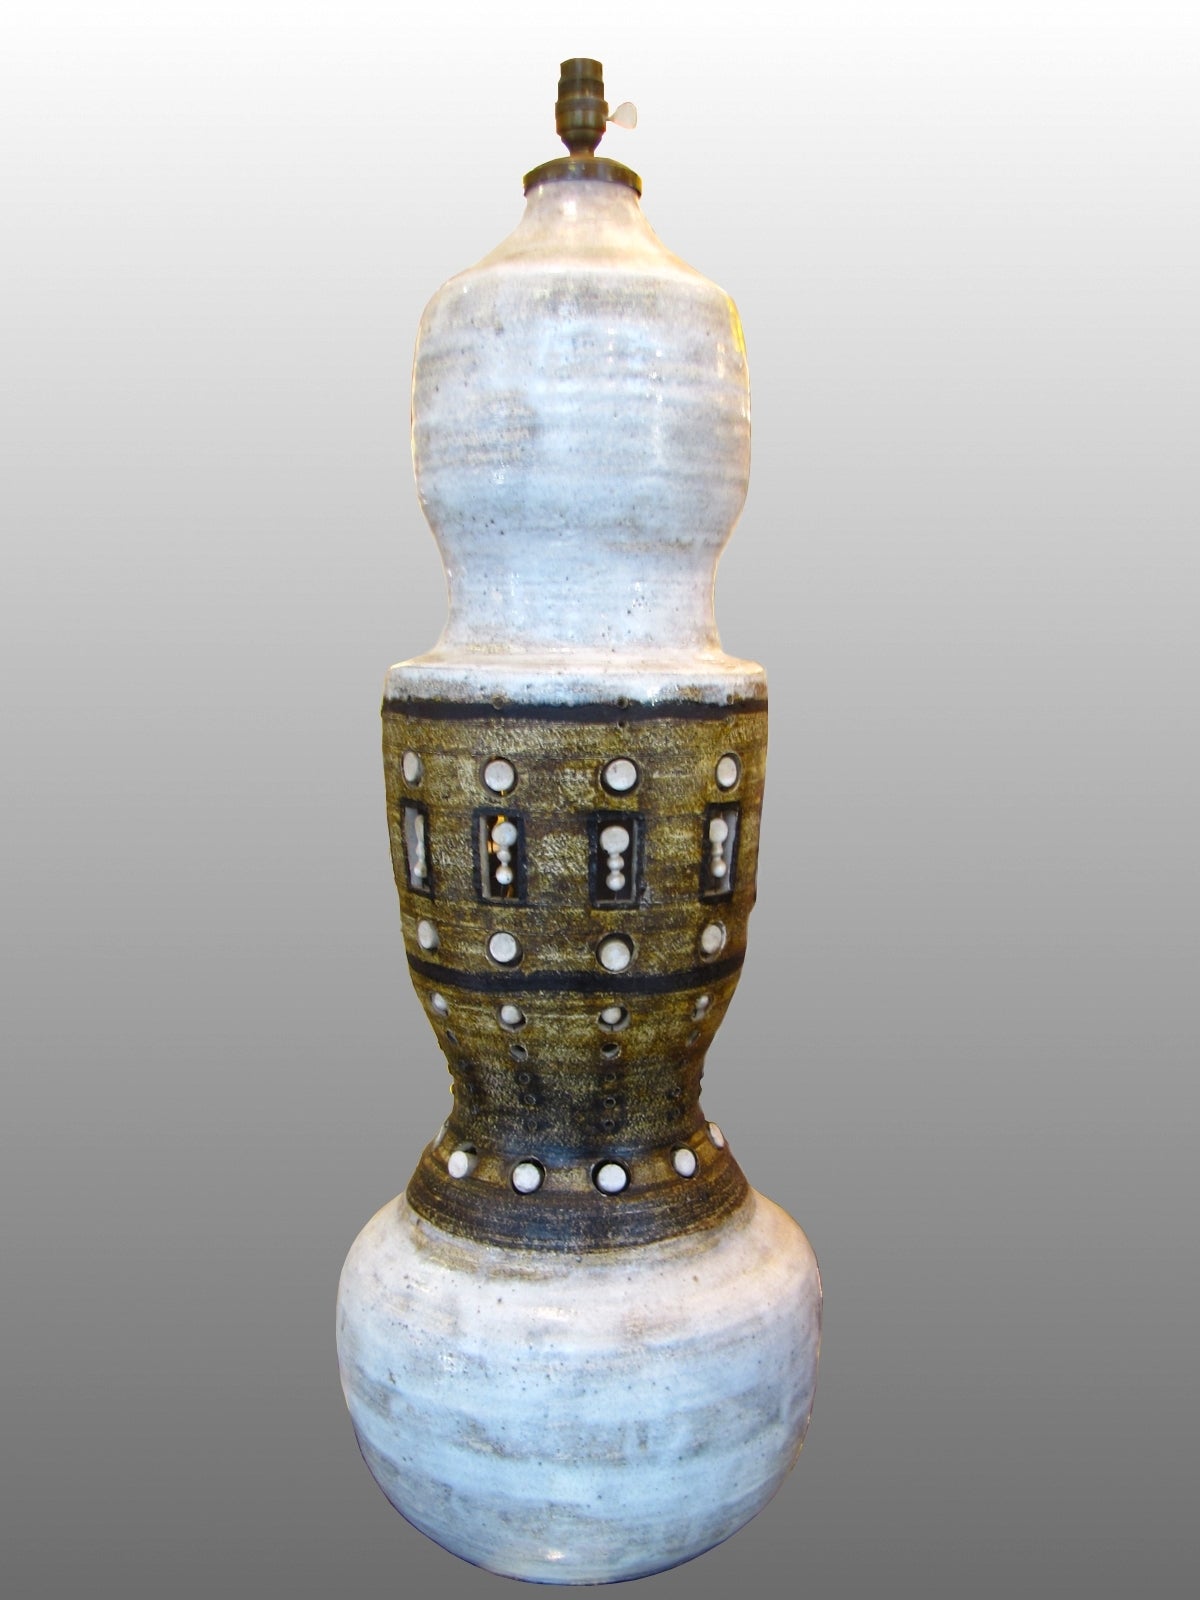 Beautiful large lamp base in enameled stoneware, with scarification and lighting in the interior of the base.

George Pelletier was born in Brussels in 1938.